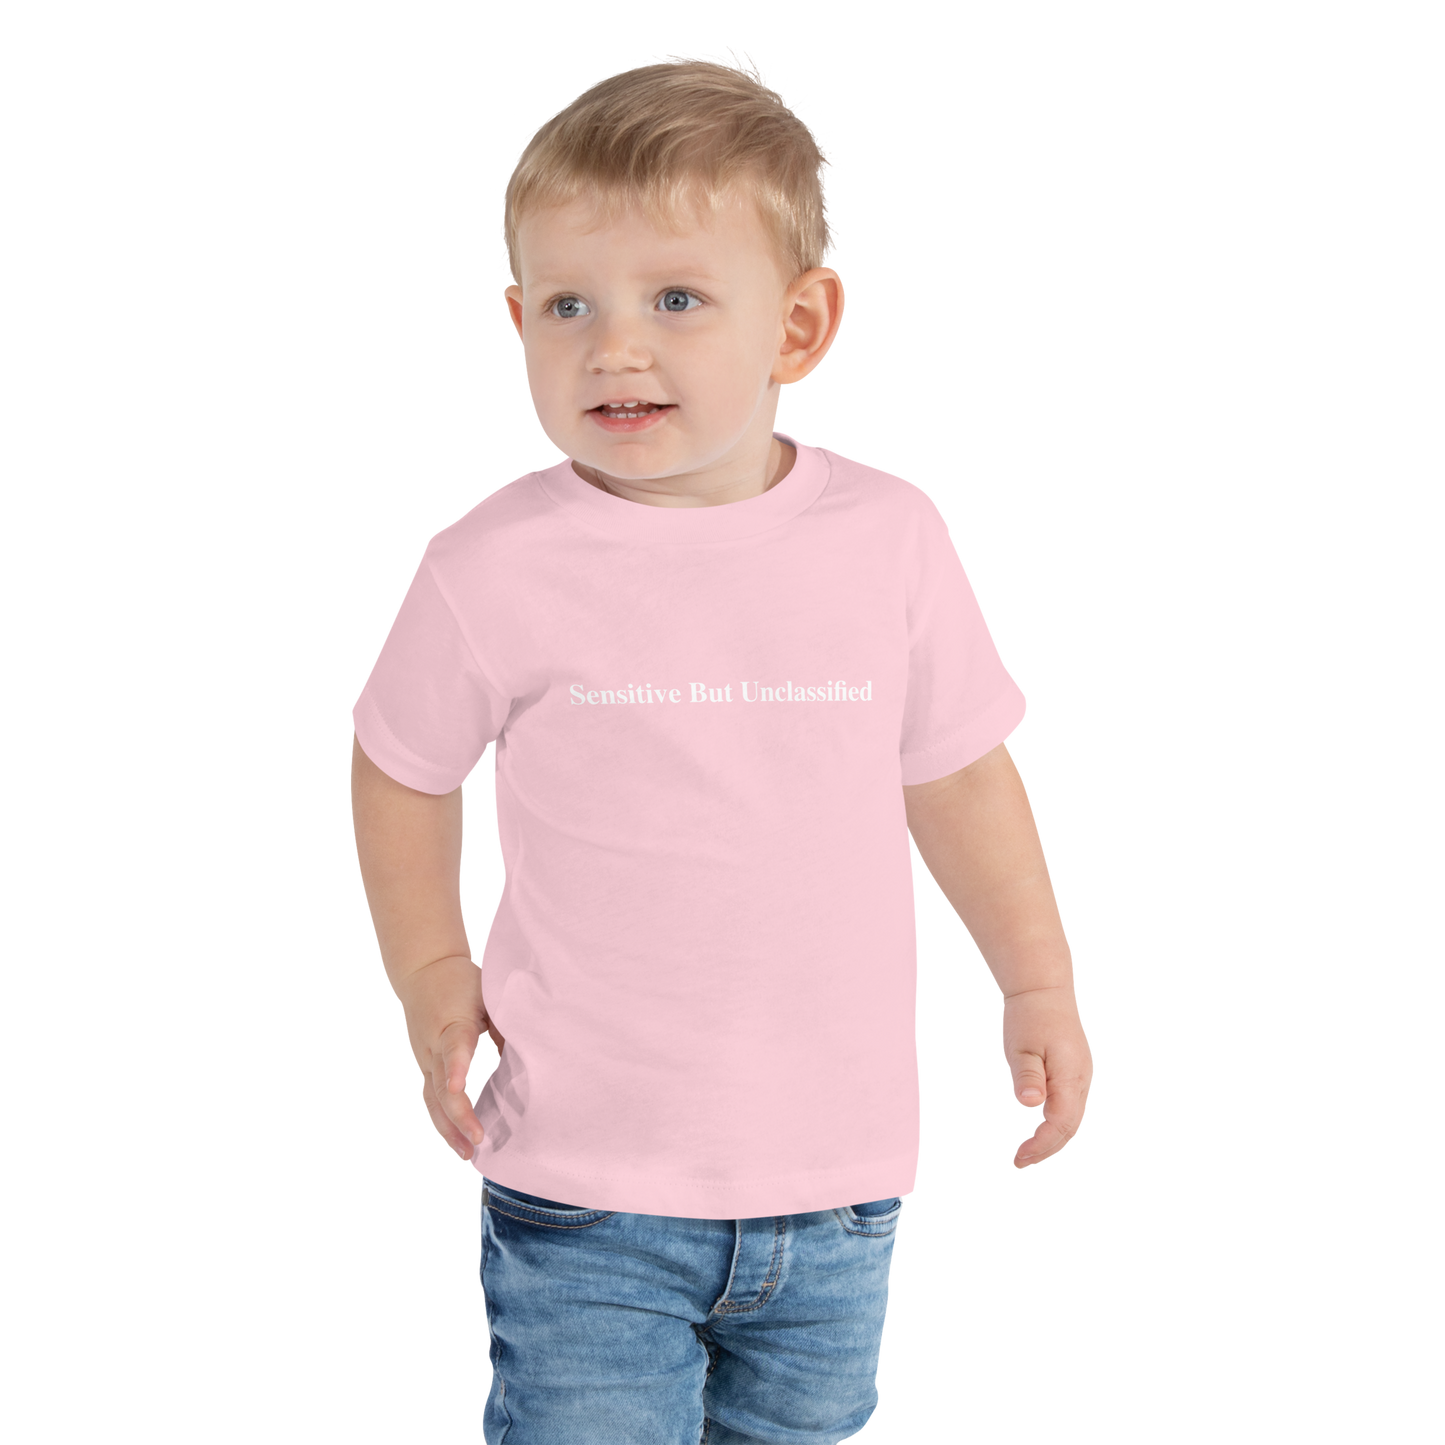 Sensitive But Unclassified toddler short sleeve tee